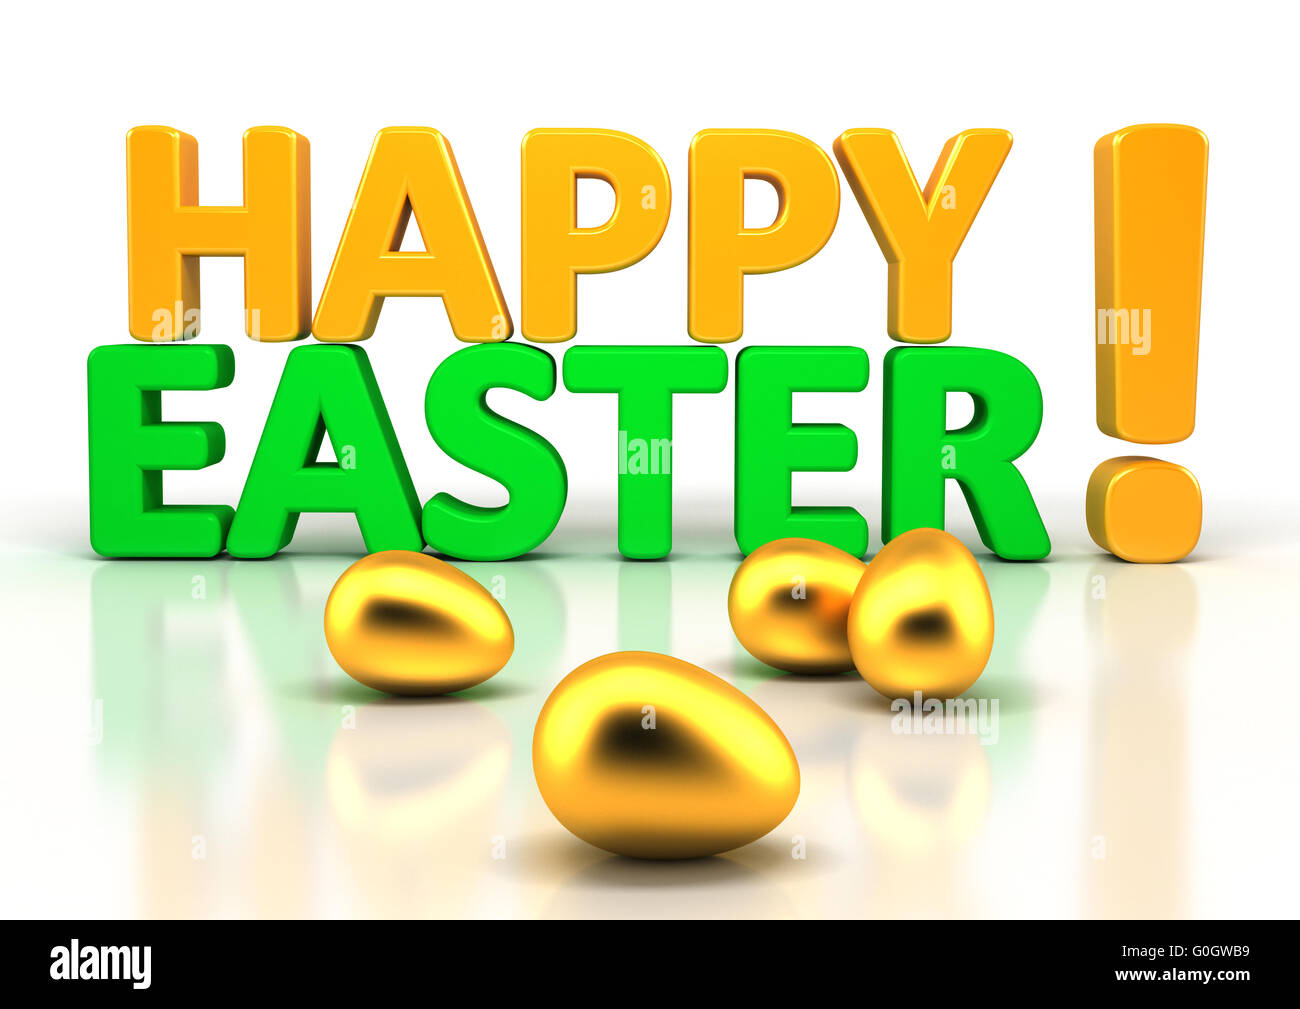 Happy Easter Greeting Isolated on White Stock Photo